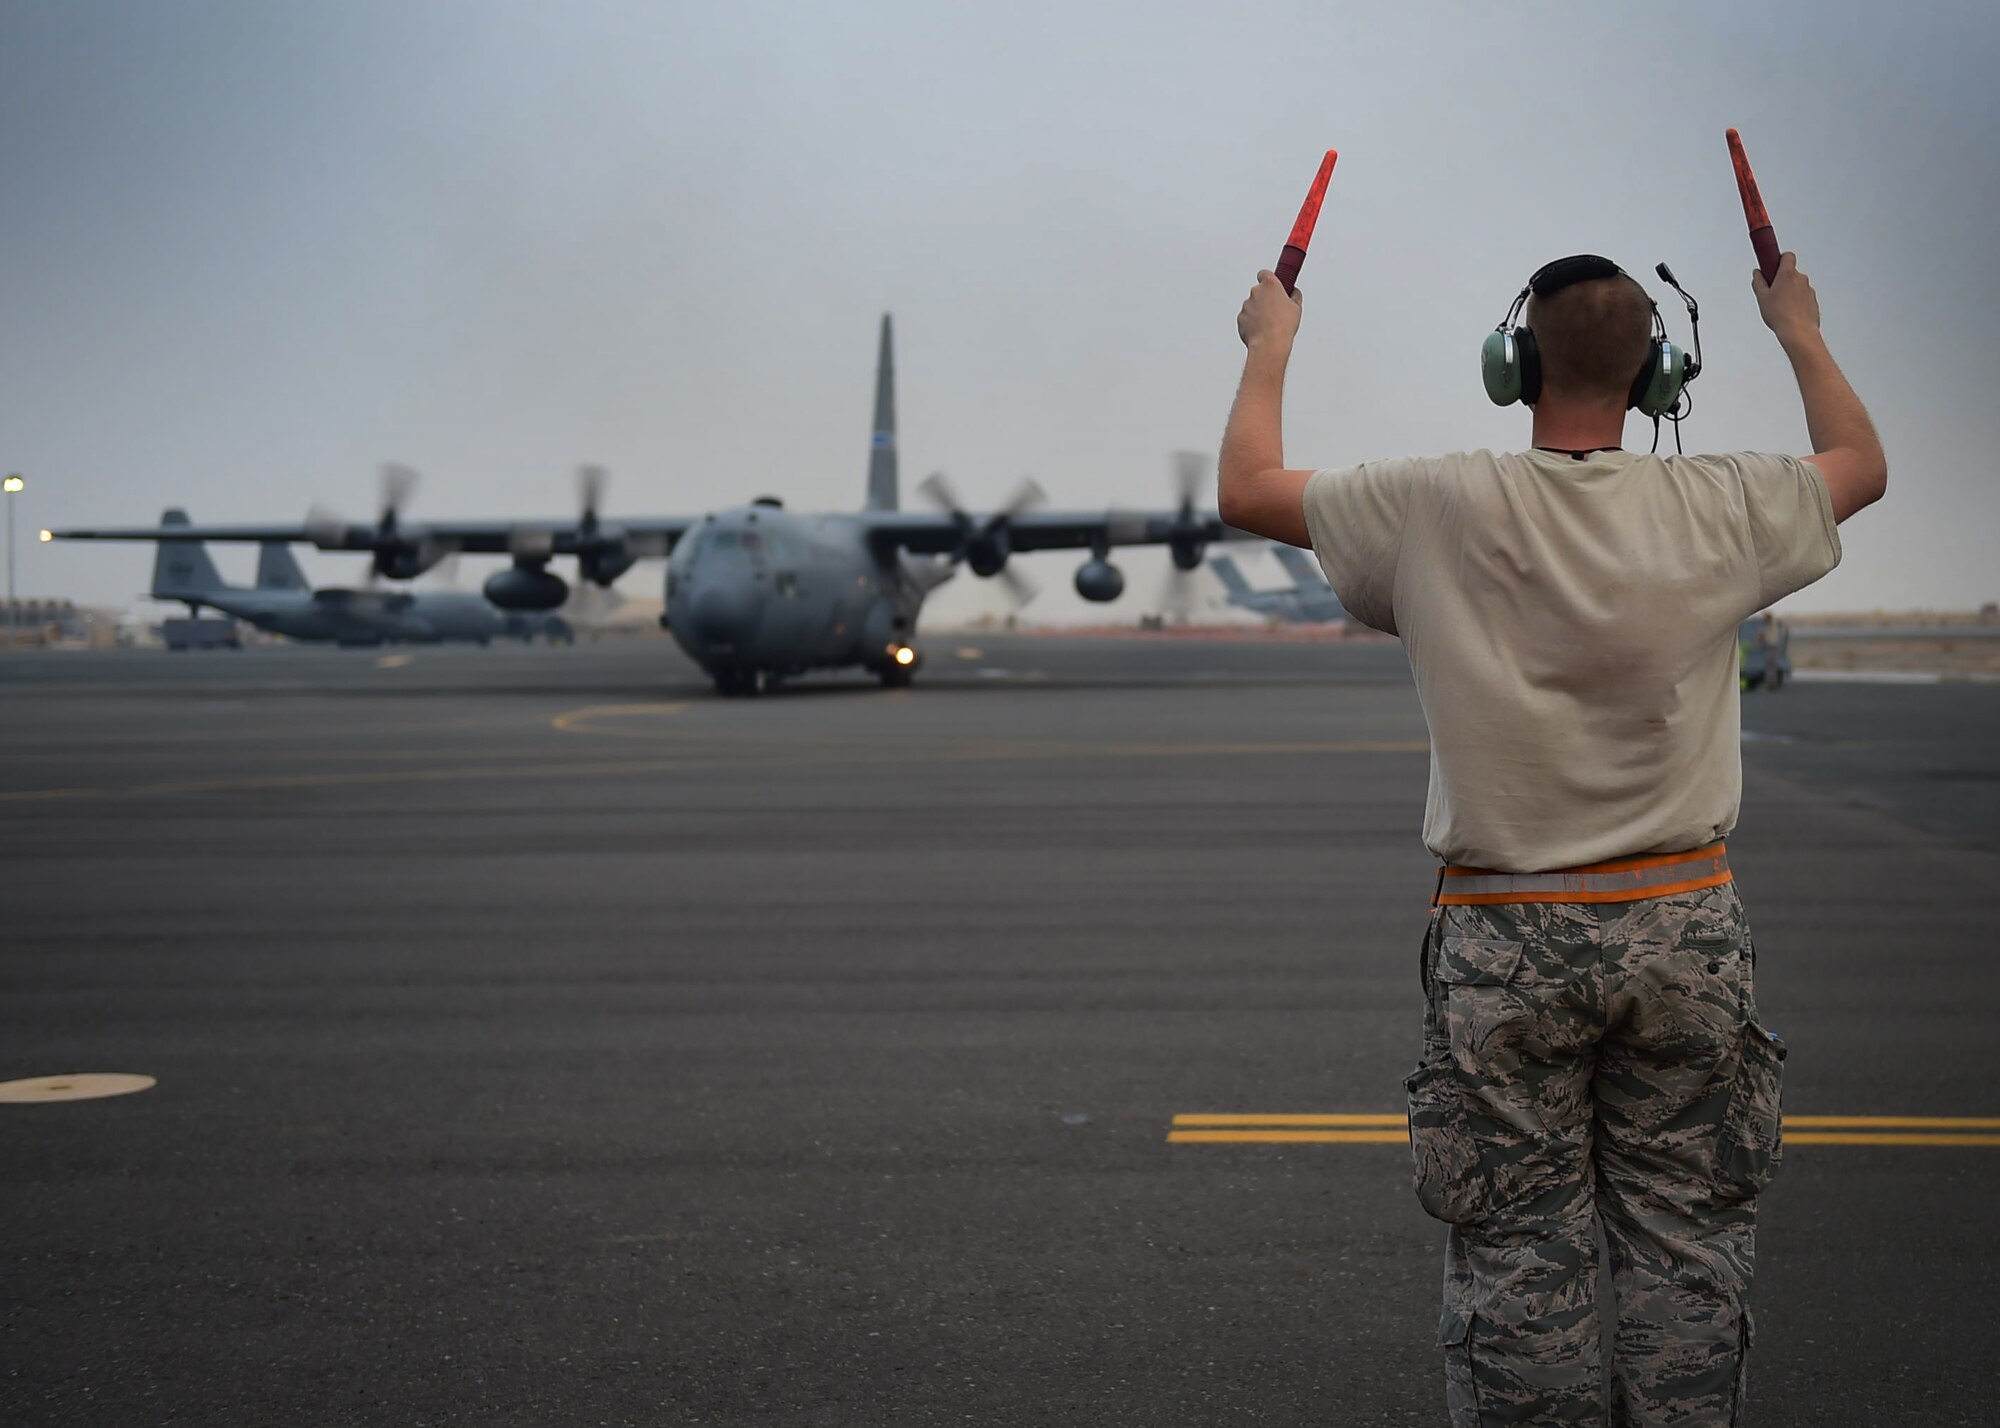 Staff Sgt. Slade Hall, 386th Expeditionary Aircraft Maintenance Squadron crew chief, marshals a C-130H Hercules for takeoff at an undisclosed location in Southwest Asia, Oct. 29, 2015. Crew chiefs are responsible for maintaining fully mission capable aircraft. They must perform inspections, launch and recover aircraft, and ensure aircraft maintenance is completed. (U.S. Air Force photo by Staff Sgt. Jerilyn Quintanilla)